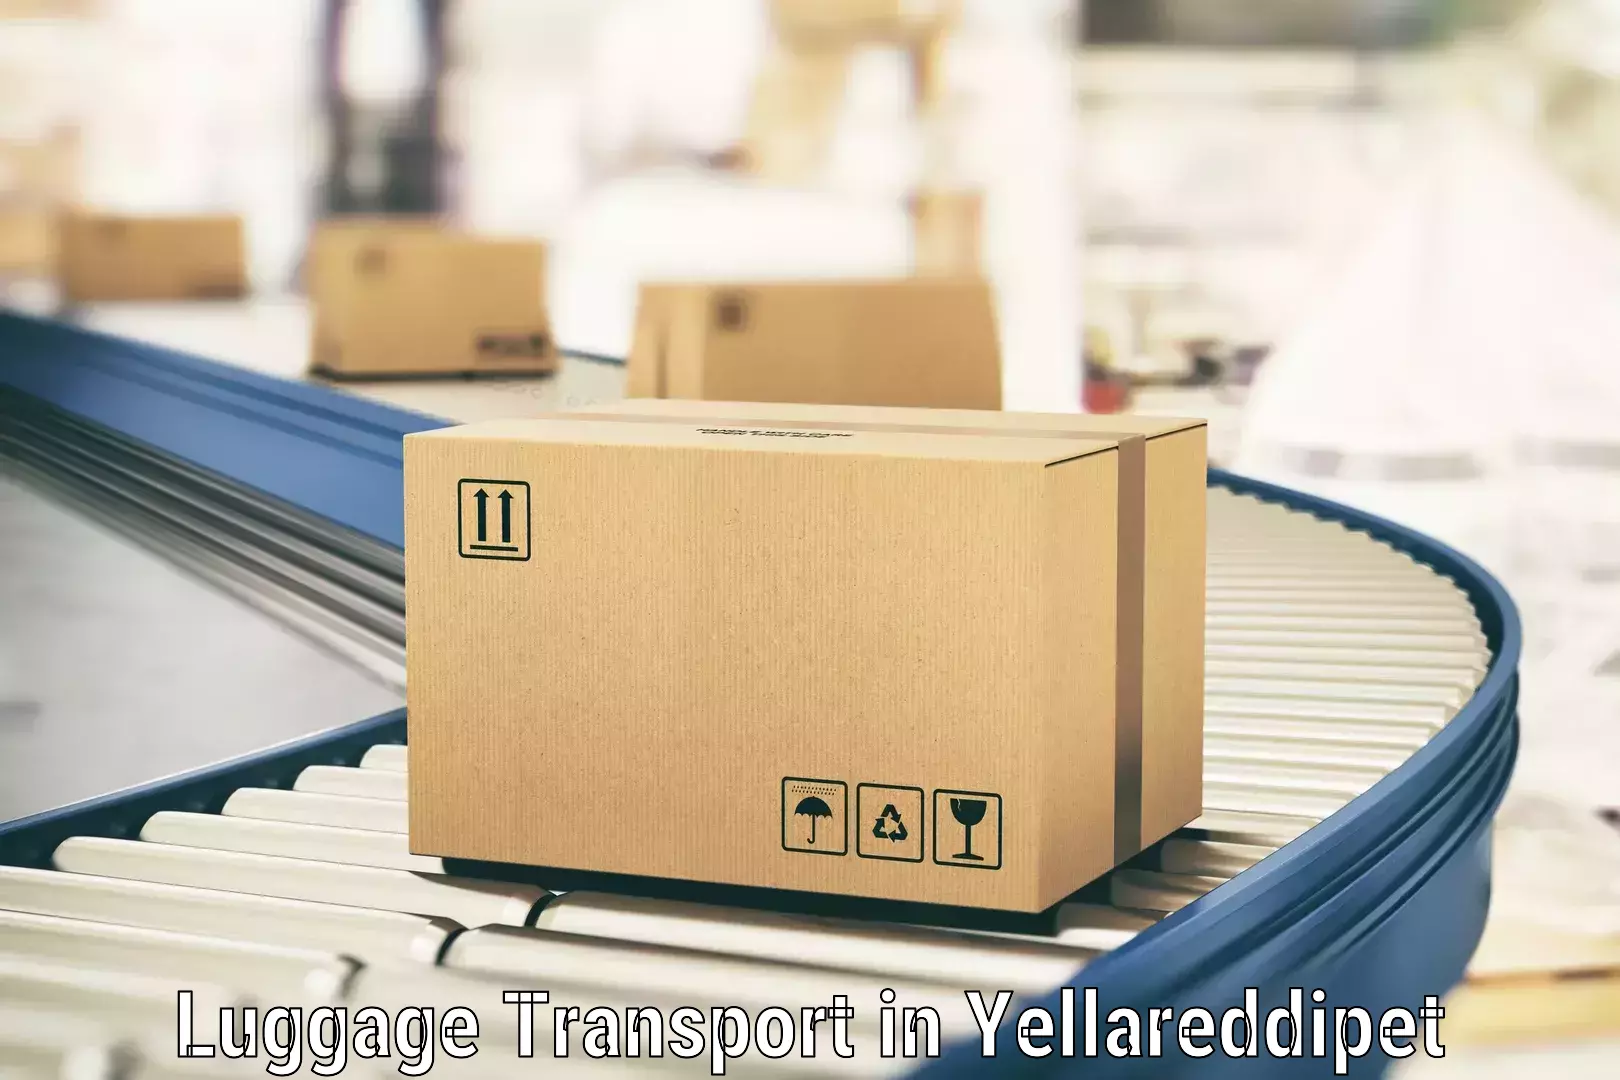 Baggage delivery scheduling in Yellareddipet